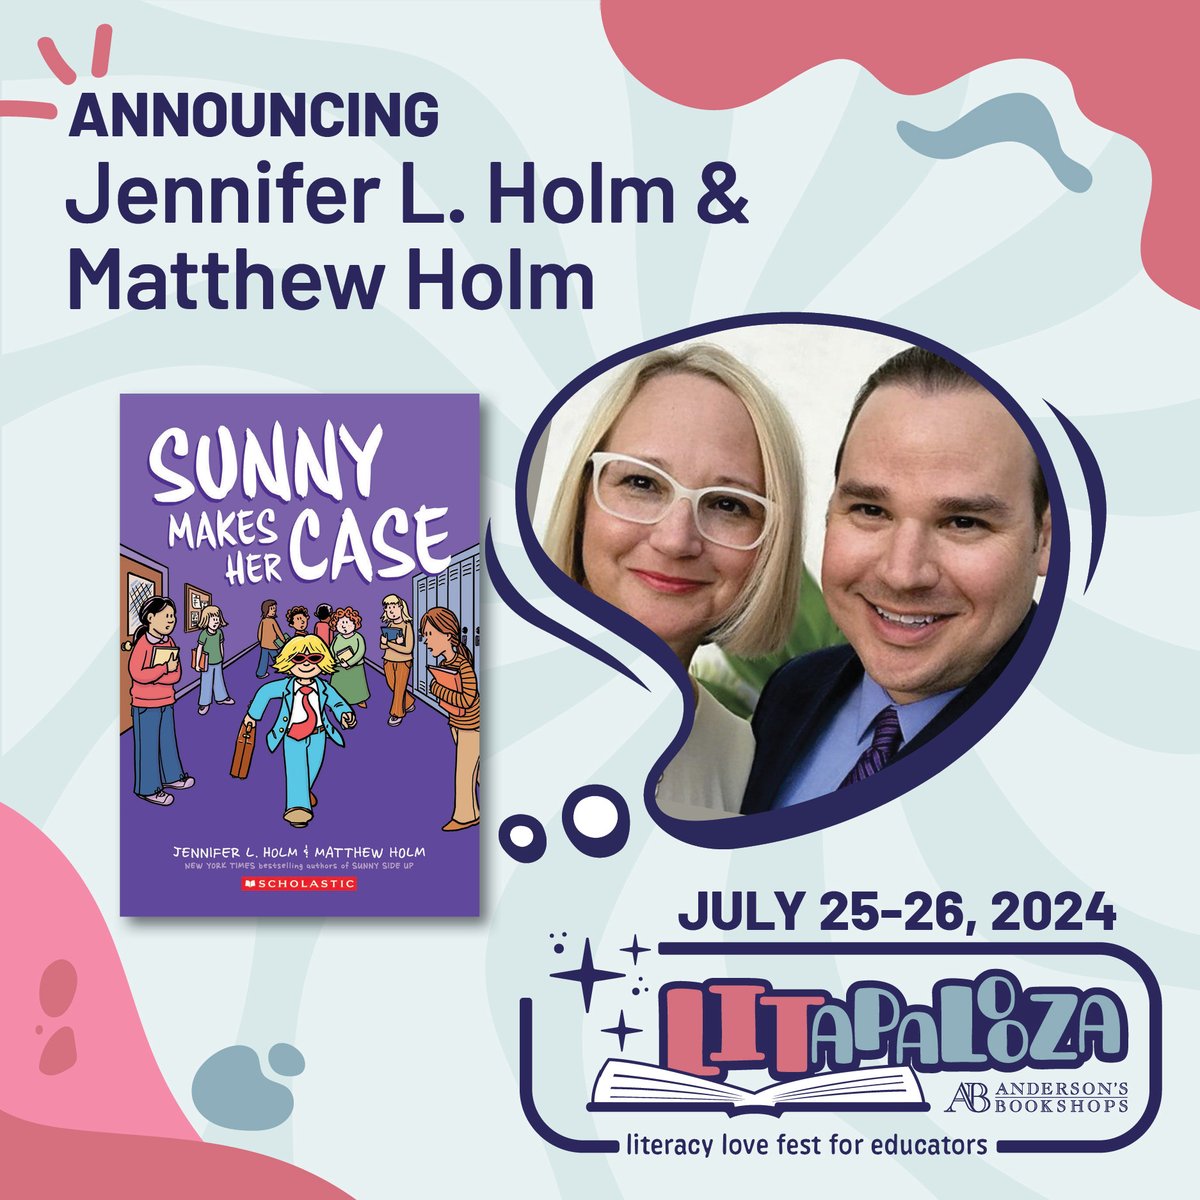 Meet BOTH @holm_jennifer & @mattholm this summer at LIT! They will hang out with YOU for two days of literacy love, breakout sessions and author signings geared towards educators! More details and register here: LITapalooza2024.eventcombo.com